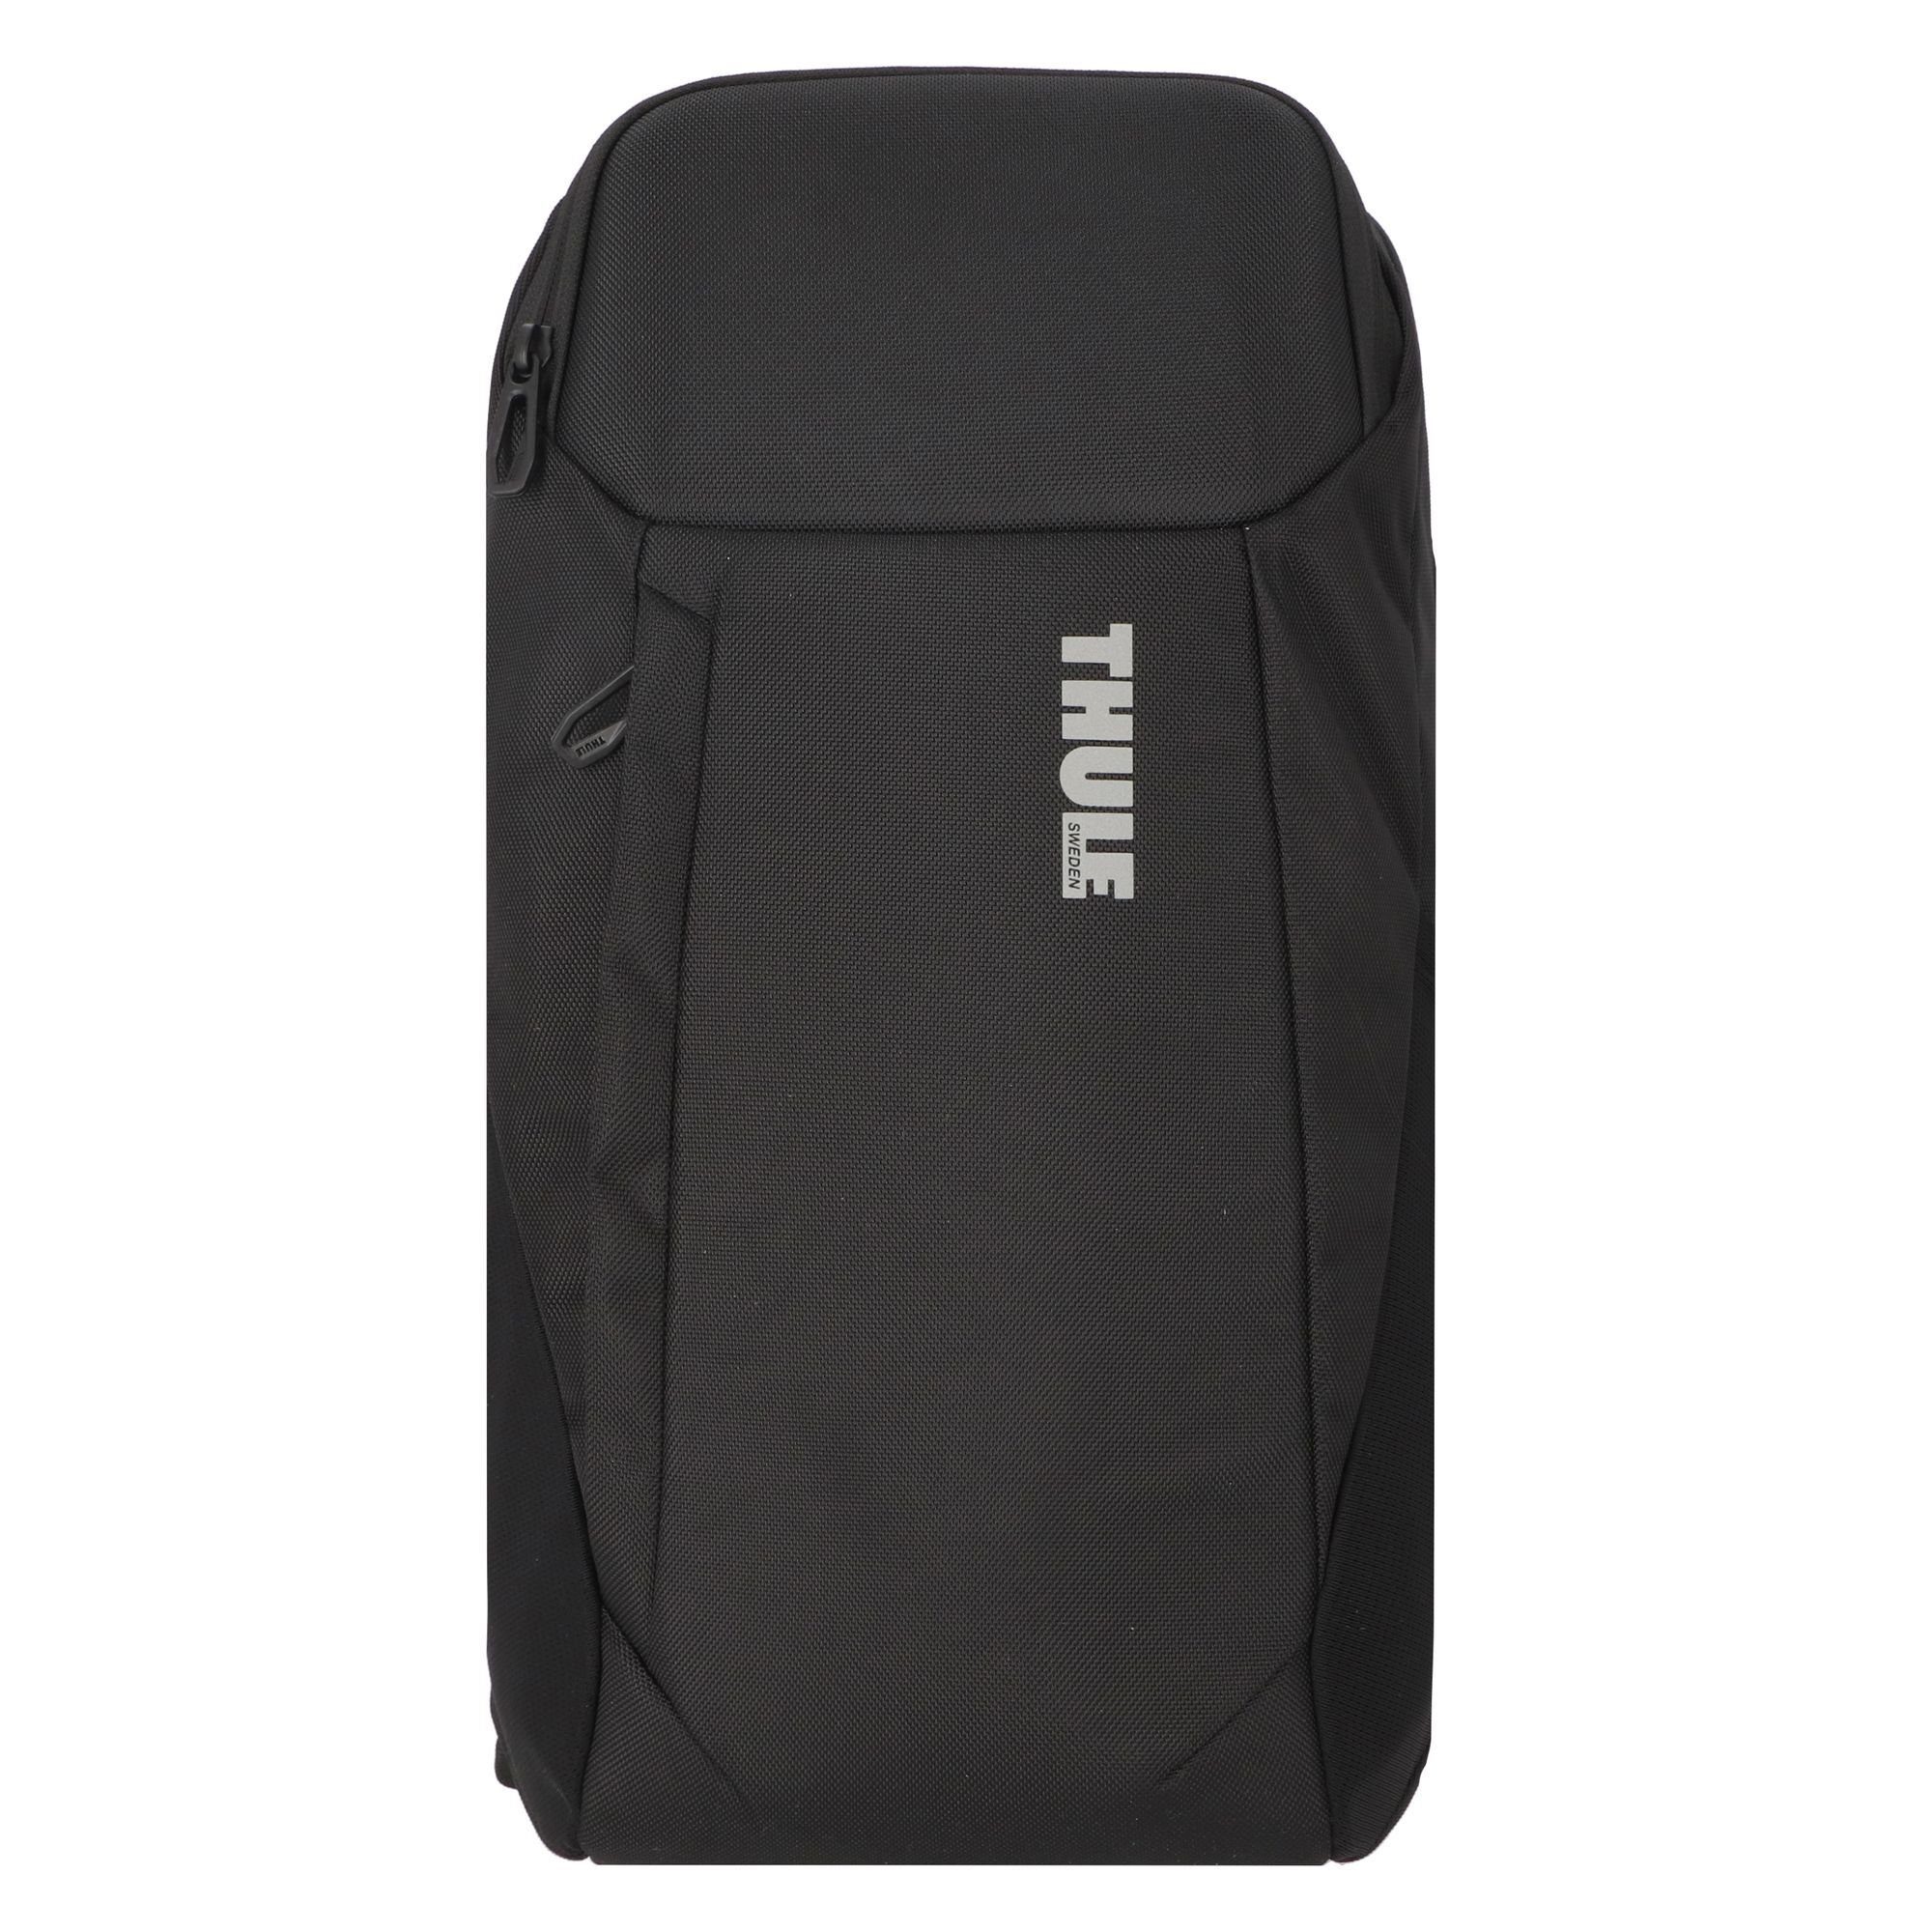 Thule Daypack Polyester Black Accent,